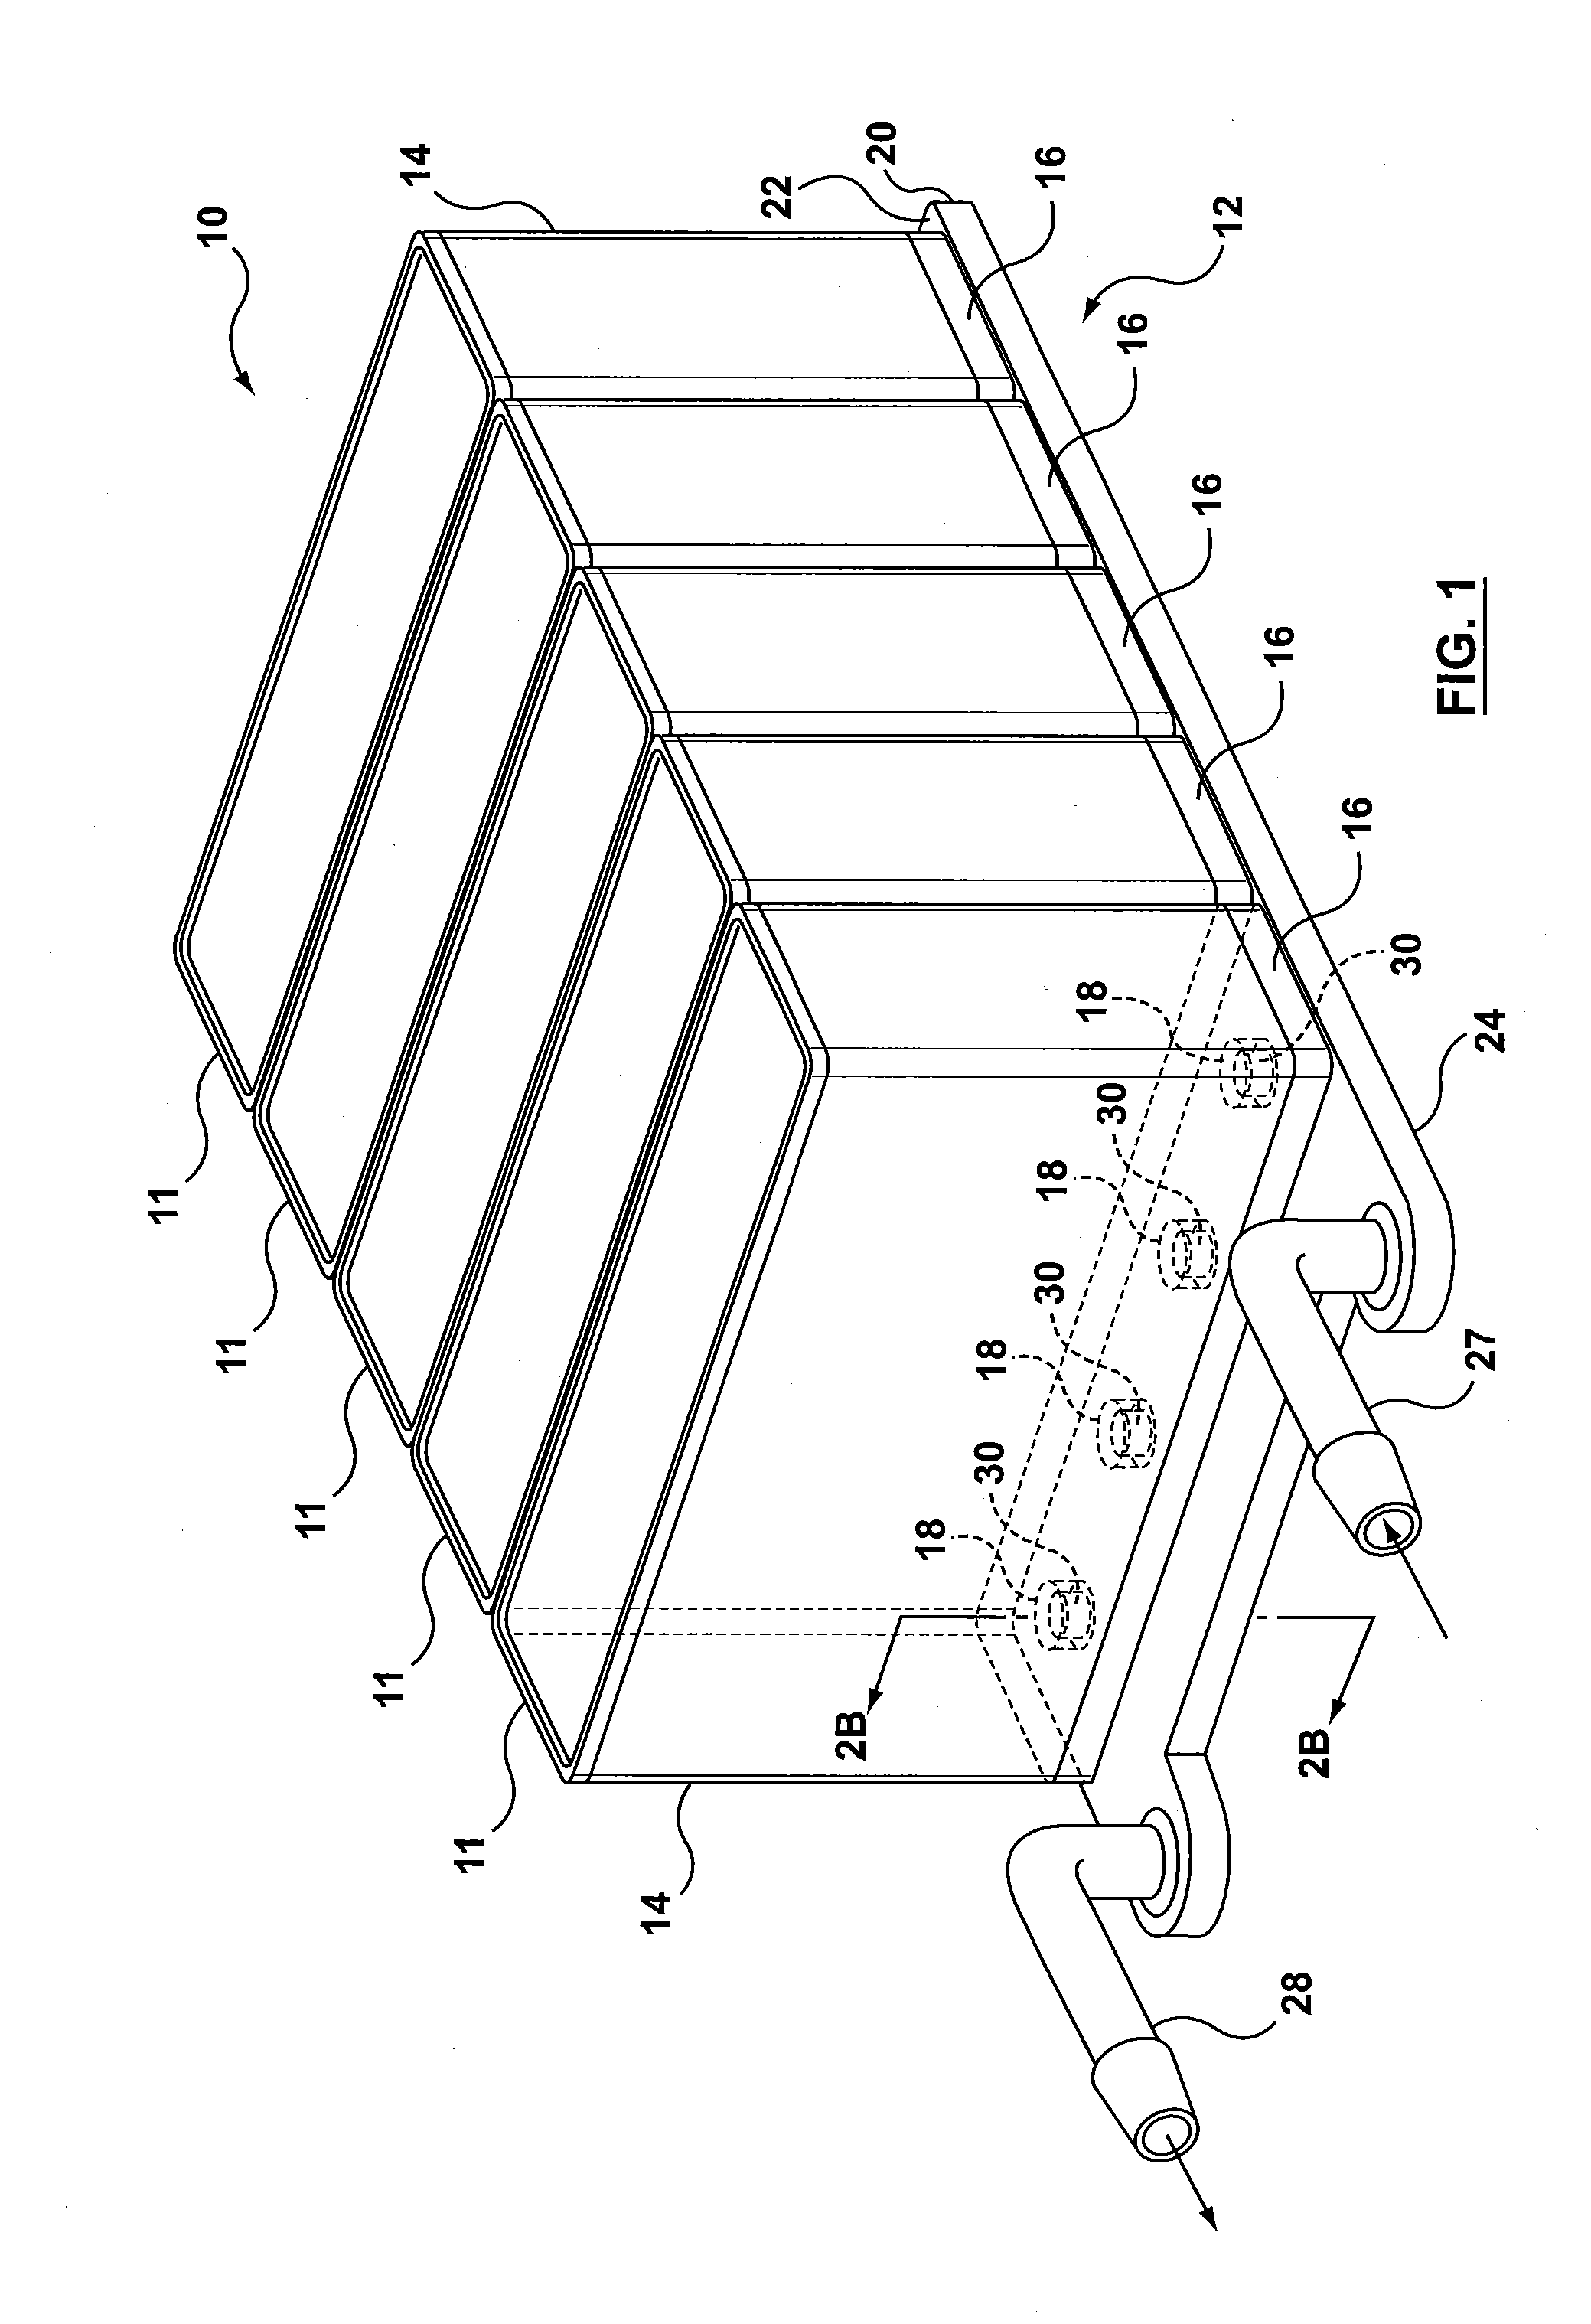 Heat Exchanger and Battery Unit Structure for Cooling Thermally Conductive Batteries